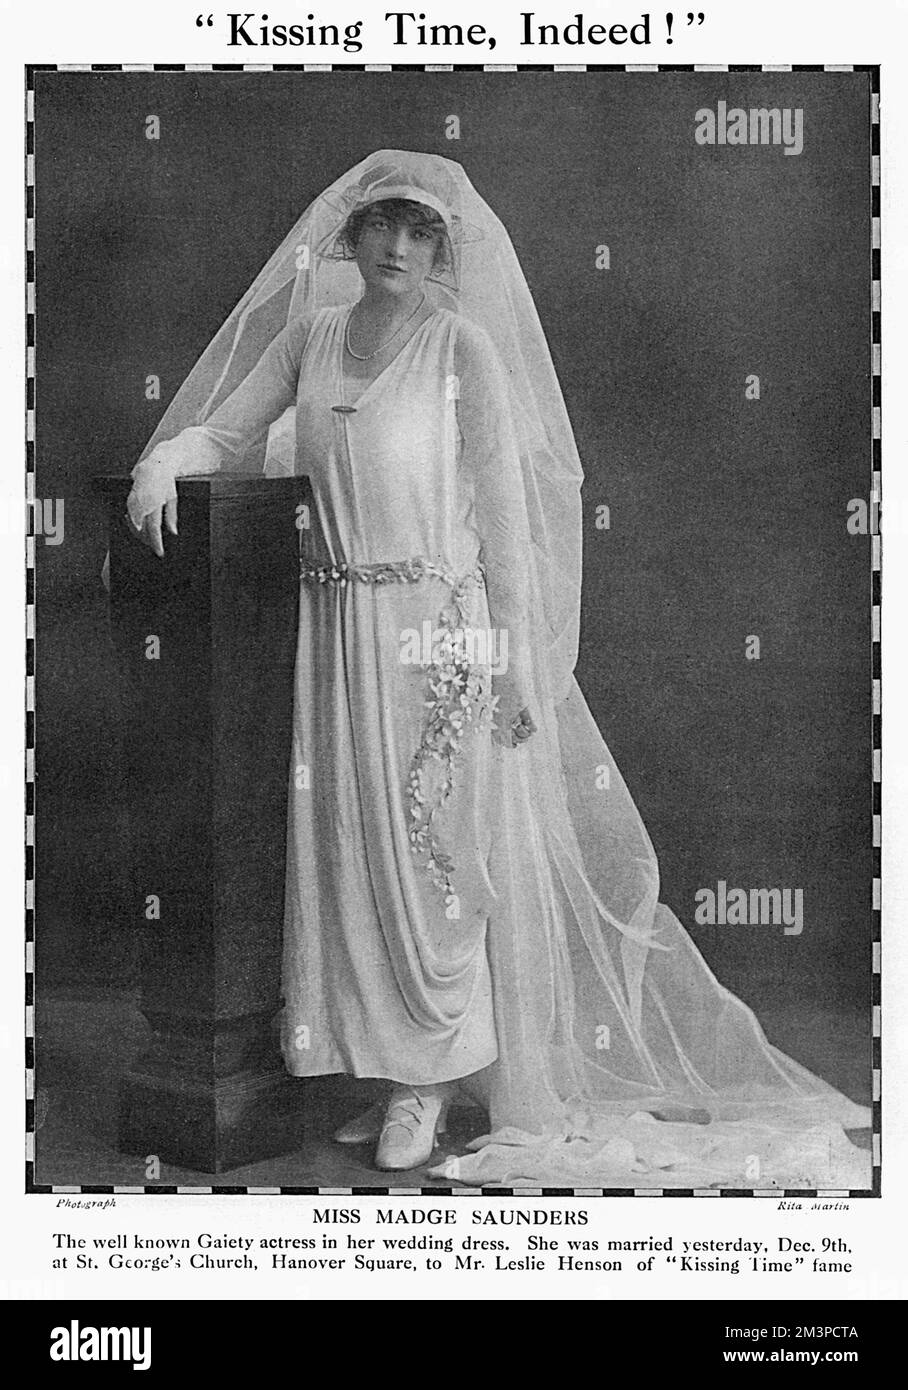 Miss Madge Saunders, the well known Gaiety actress pictured in her wedding dress for her marriage to the popular actor, Mr. Leslie Henson at St. George's Church in Hanover Square on 9 December 1919.     Date: 1919 Stock Photo